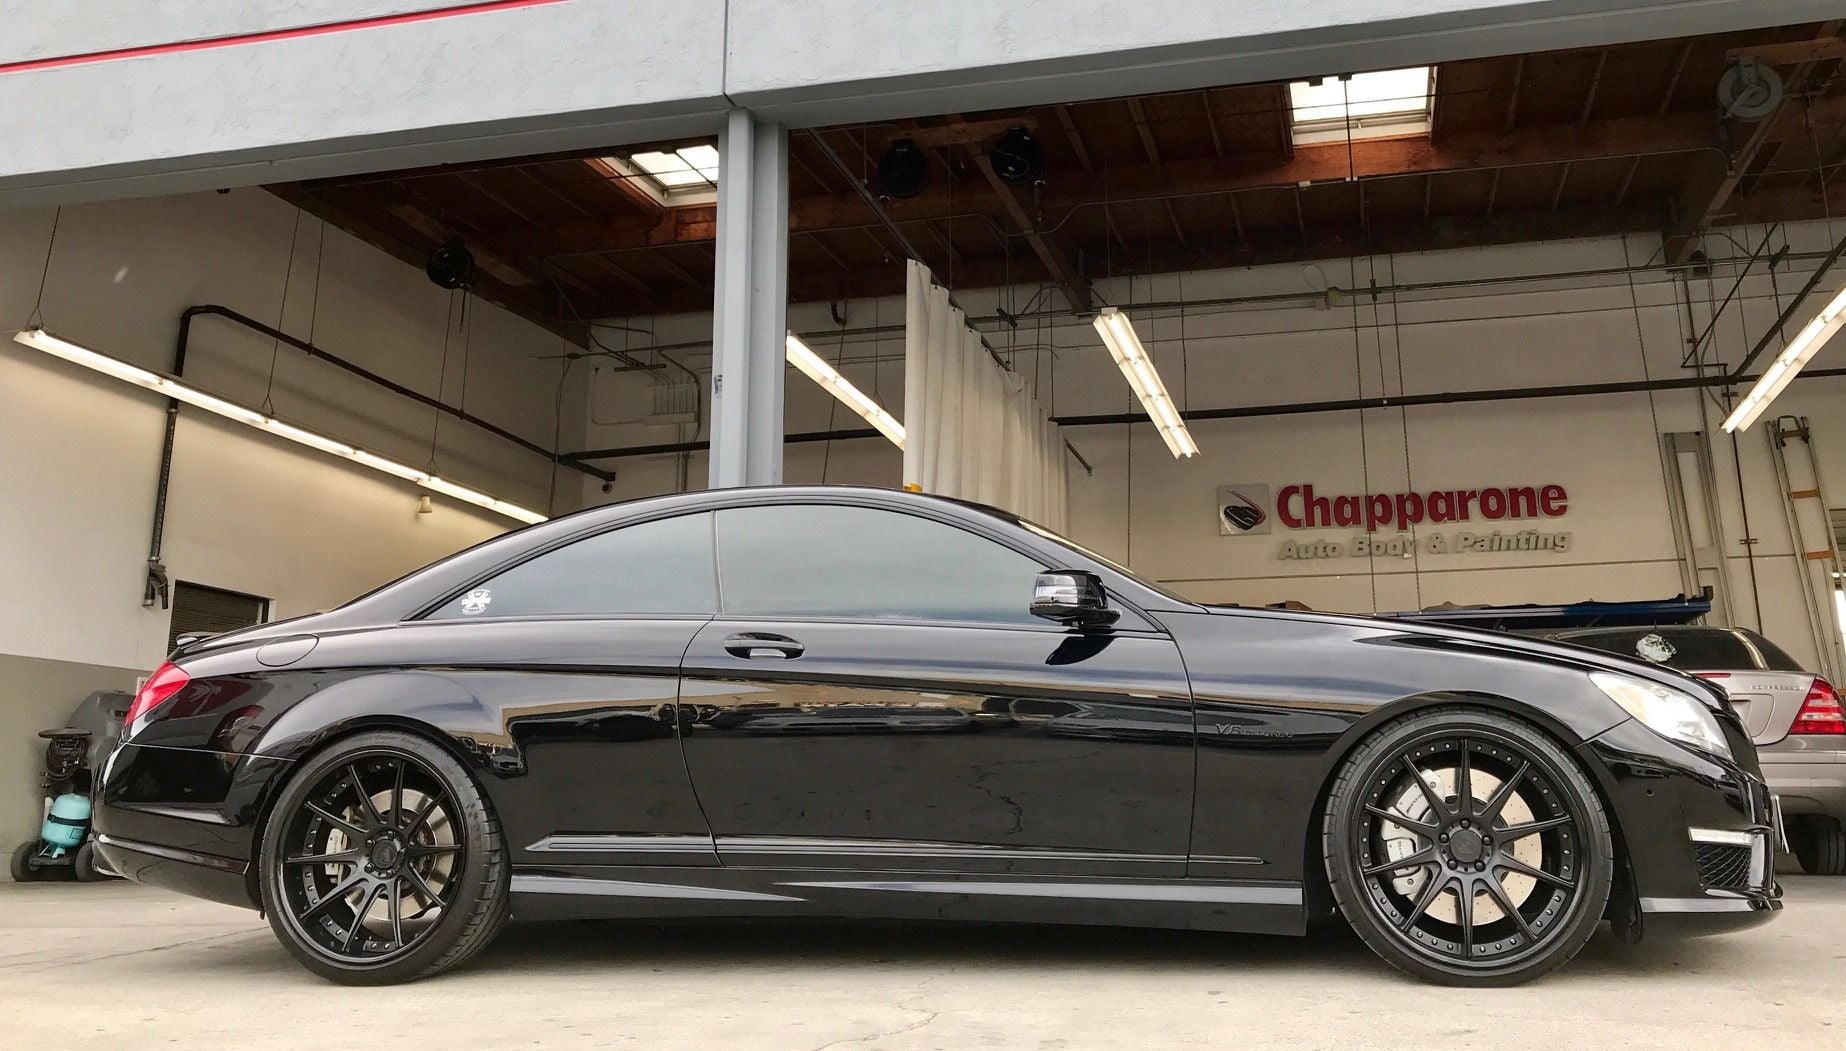 2012 Mercedes-Benz CL63 AMG - 2012 MB AMG CL63 -- Beautiful Condition - Used - VIN wddej7eb3ca028692 - 75,000 Miles - 8 cyl - 2WD - Automatic - Coupe - Black - Trappe, MD 21673, United States